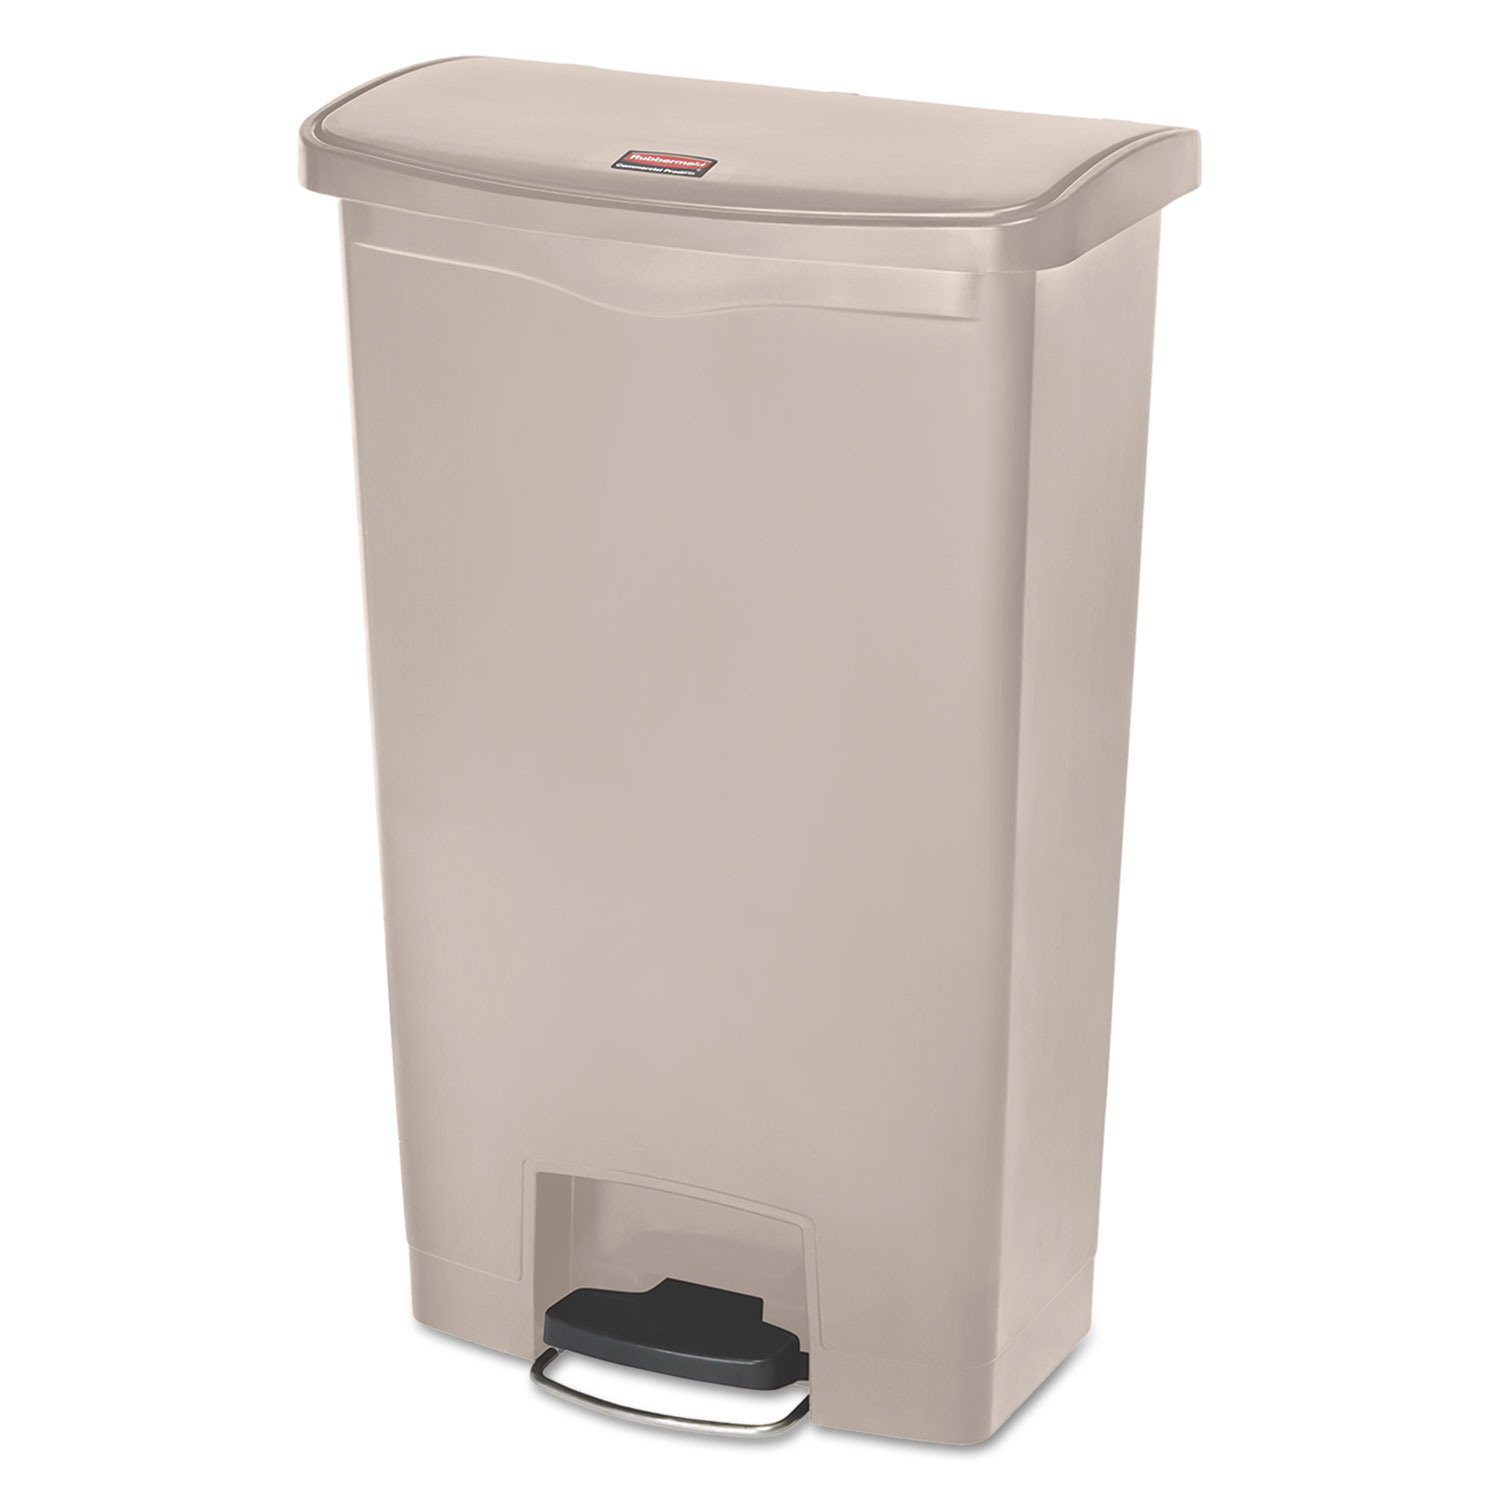  Rubbermaid Commercial 1883460 Slim Jim Resin Step-On Container, Front Step Style, 18 gal, Beige (RCP1883460) 